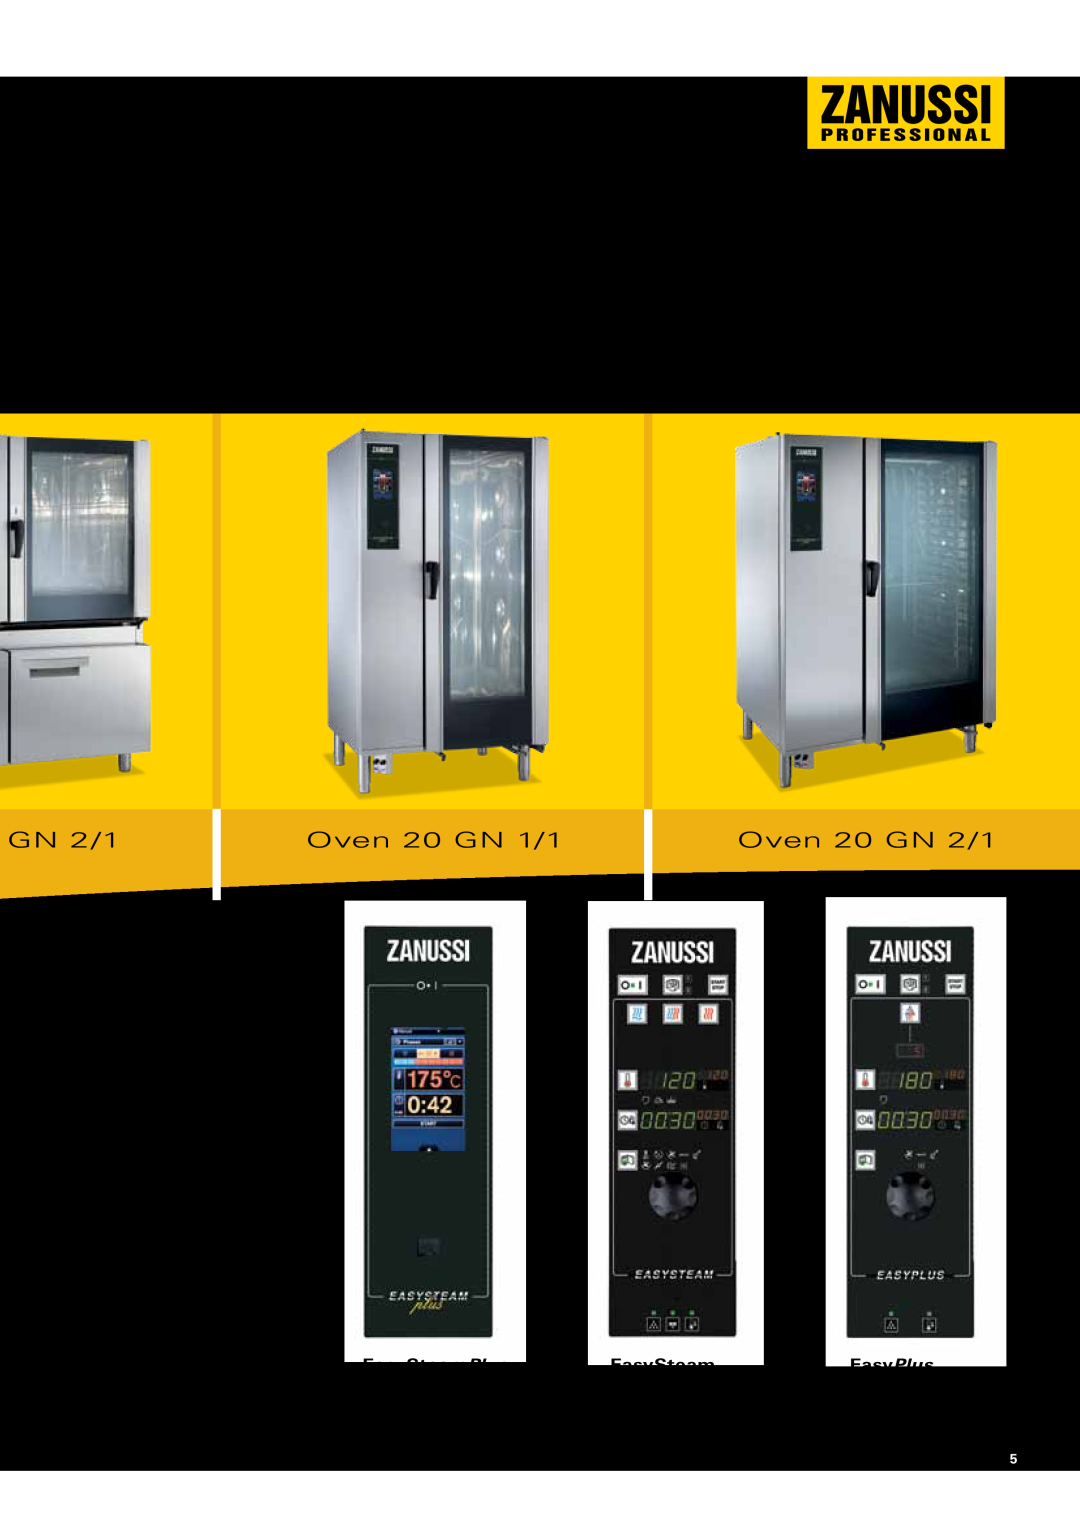 Zanussi Convection Oven manual Ovens, Three different ovens to satisfy all your needs, Oven 20 GN 1/1, Oven 20 GN 2/1 